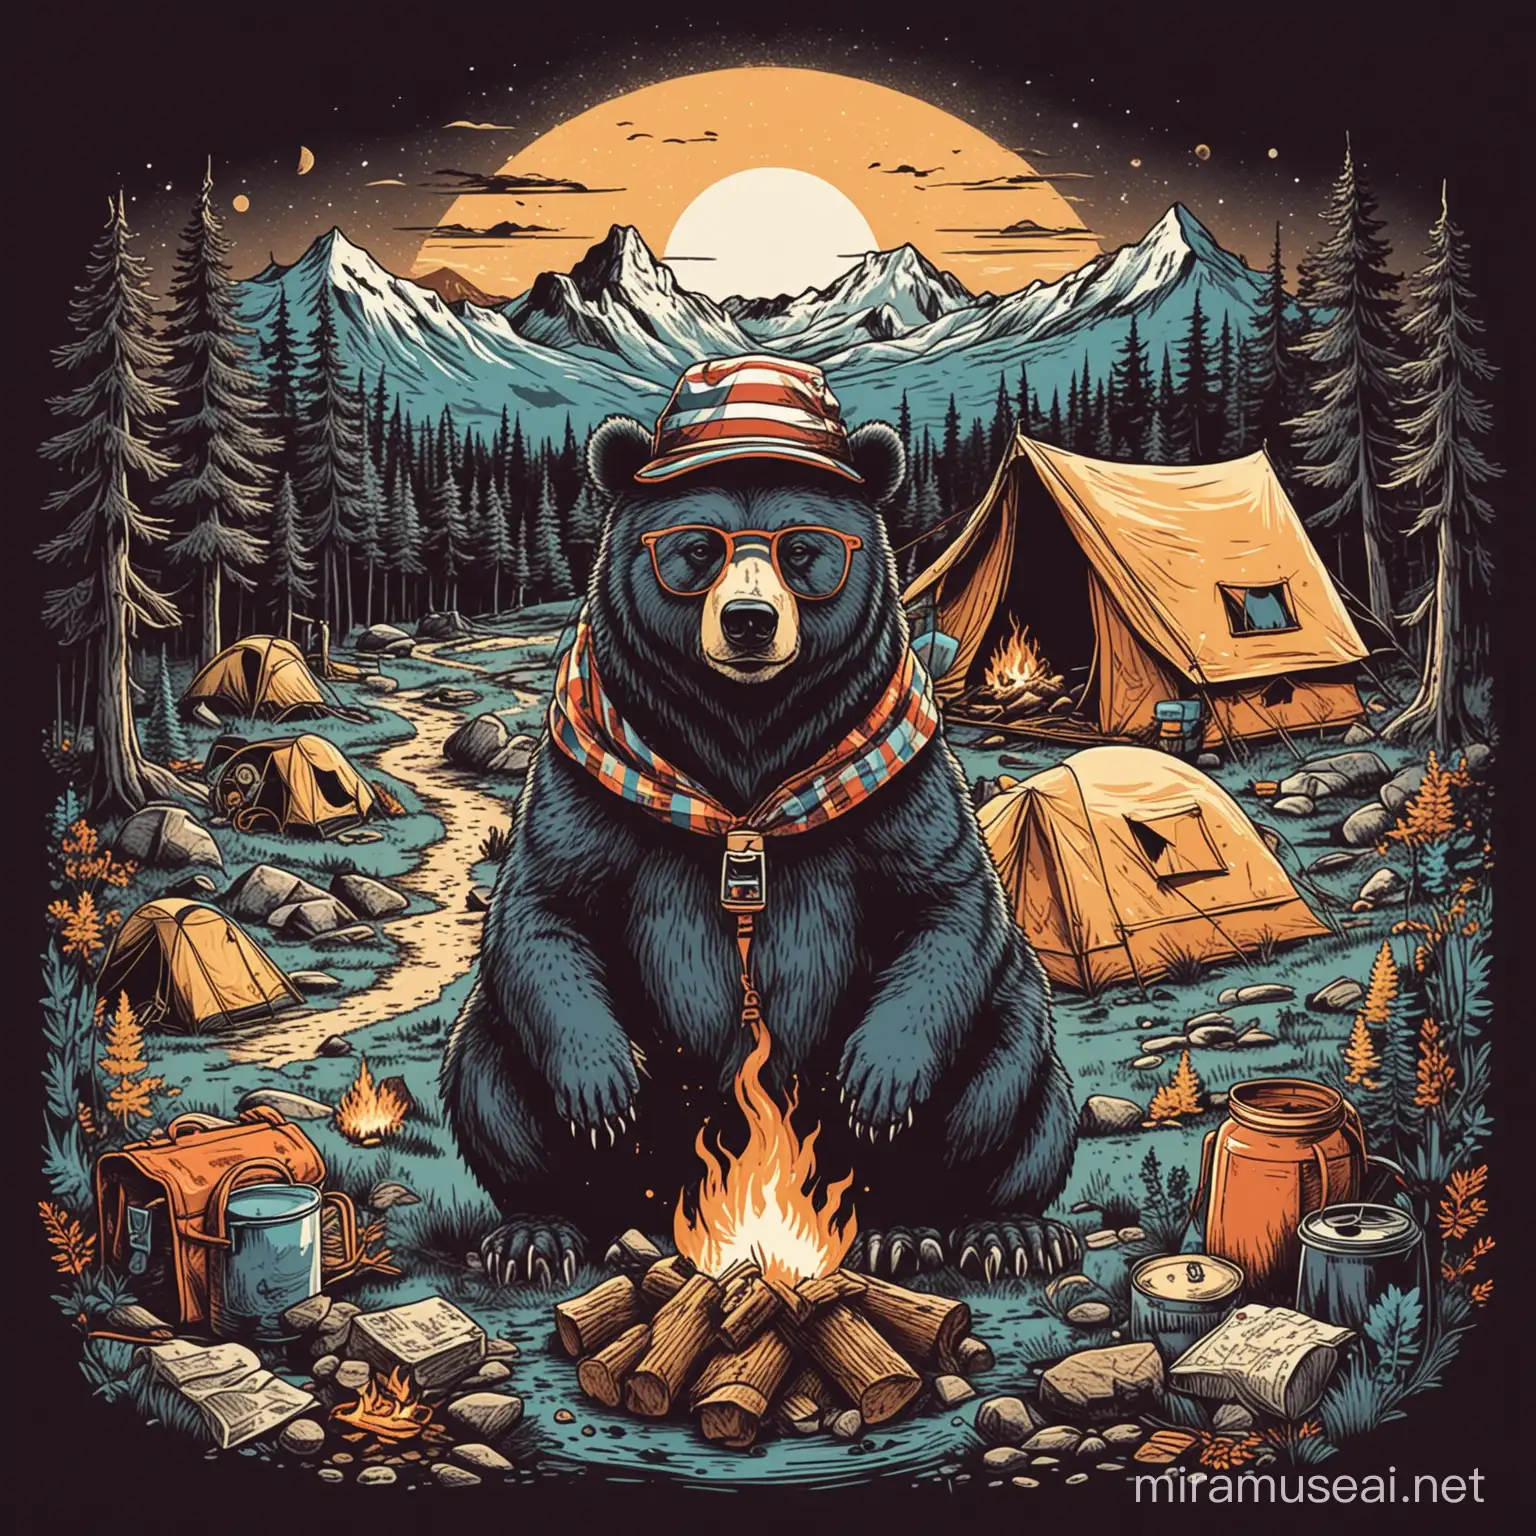 A colorful and playful retro-style vector lineart illustration of a bear camping in a mountain setting. The bear, with round glasses and a black and white striped hat, sets up a tent next to a campfire. Surrounding the scene are various camping items such as a lantern, a backpack, and a map. The overall design exudes a sense of nostalgia and fun, making it an ideal t-shirt graphic for fans of outdoor adventures and vintage aesthetics.
